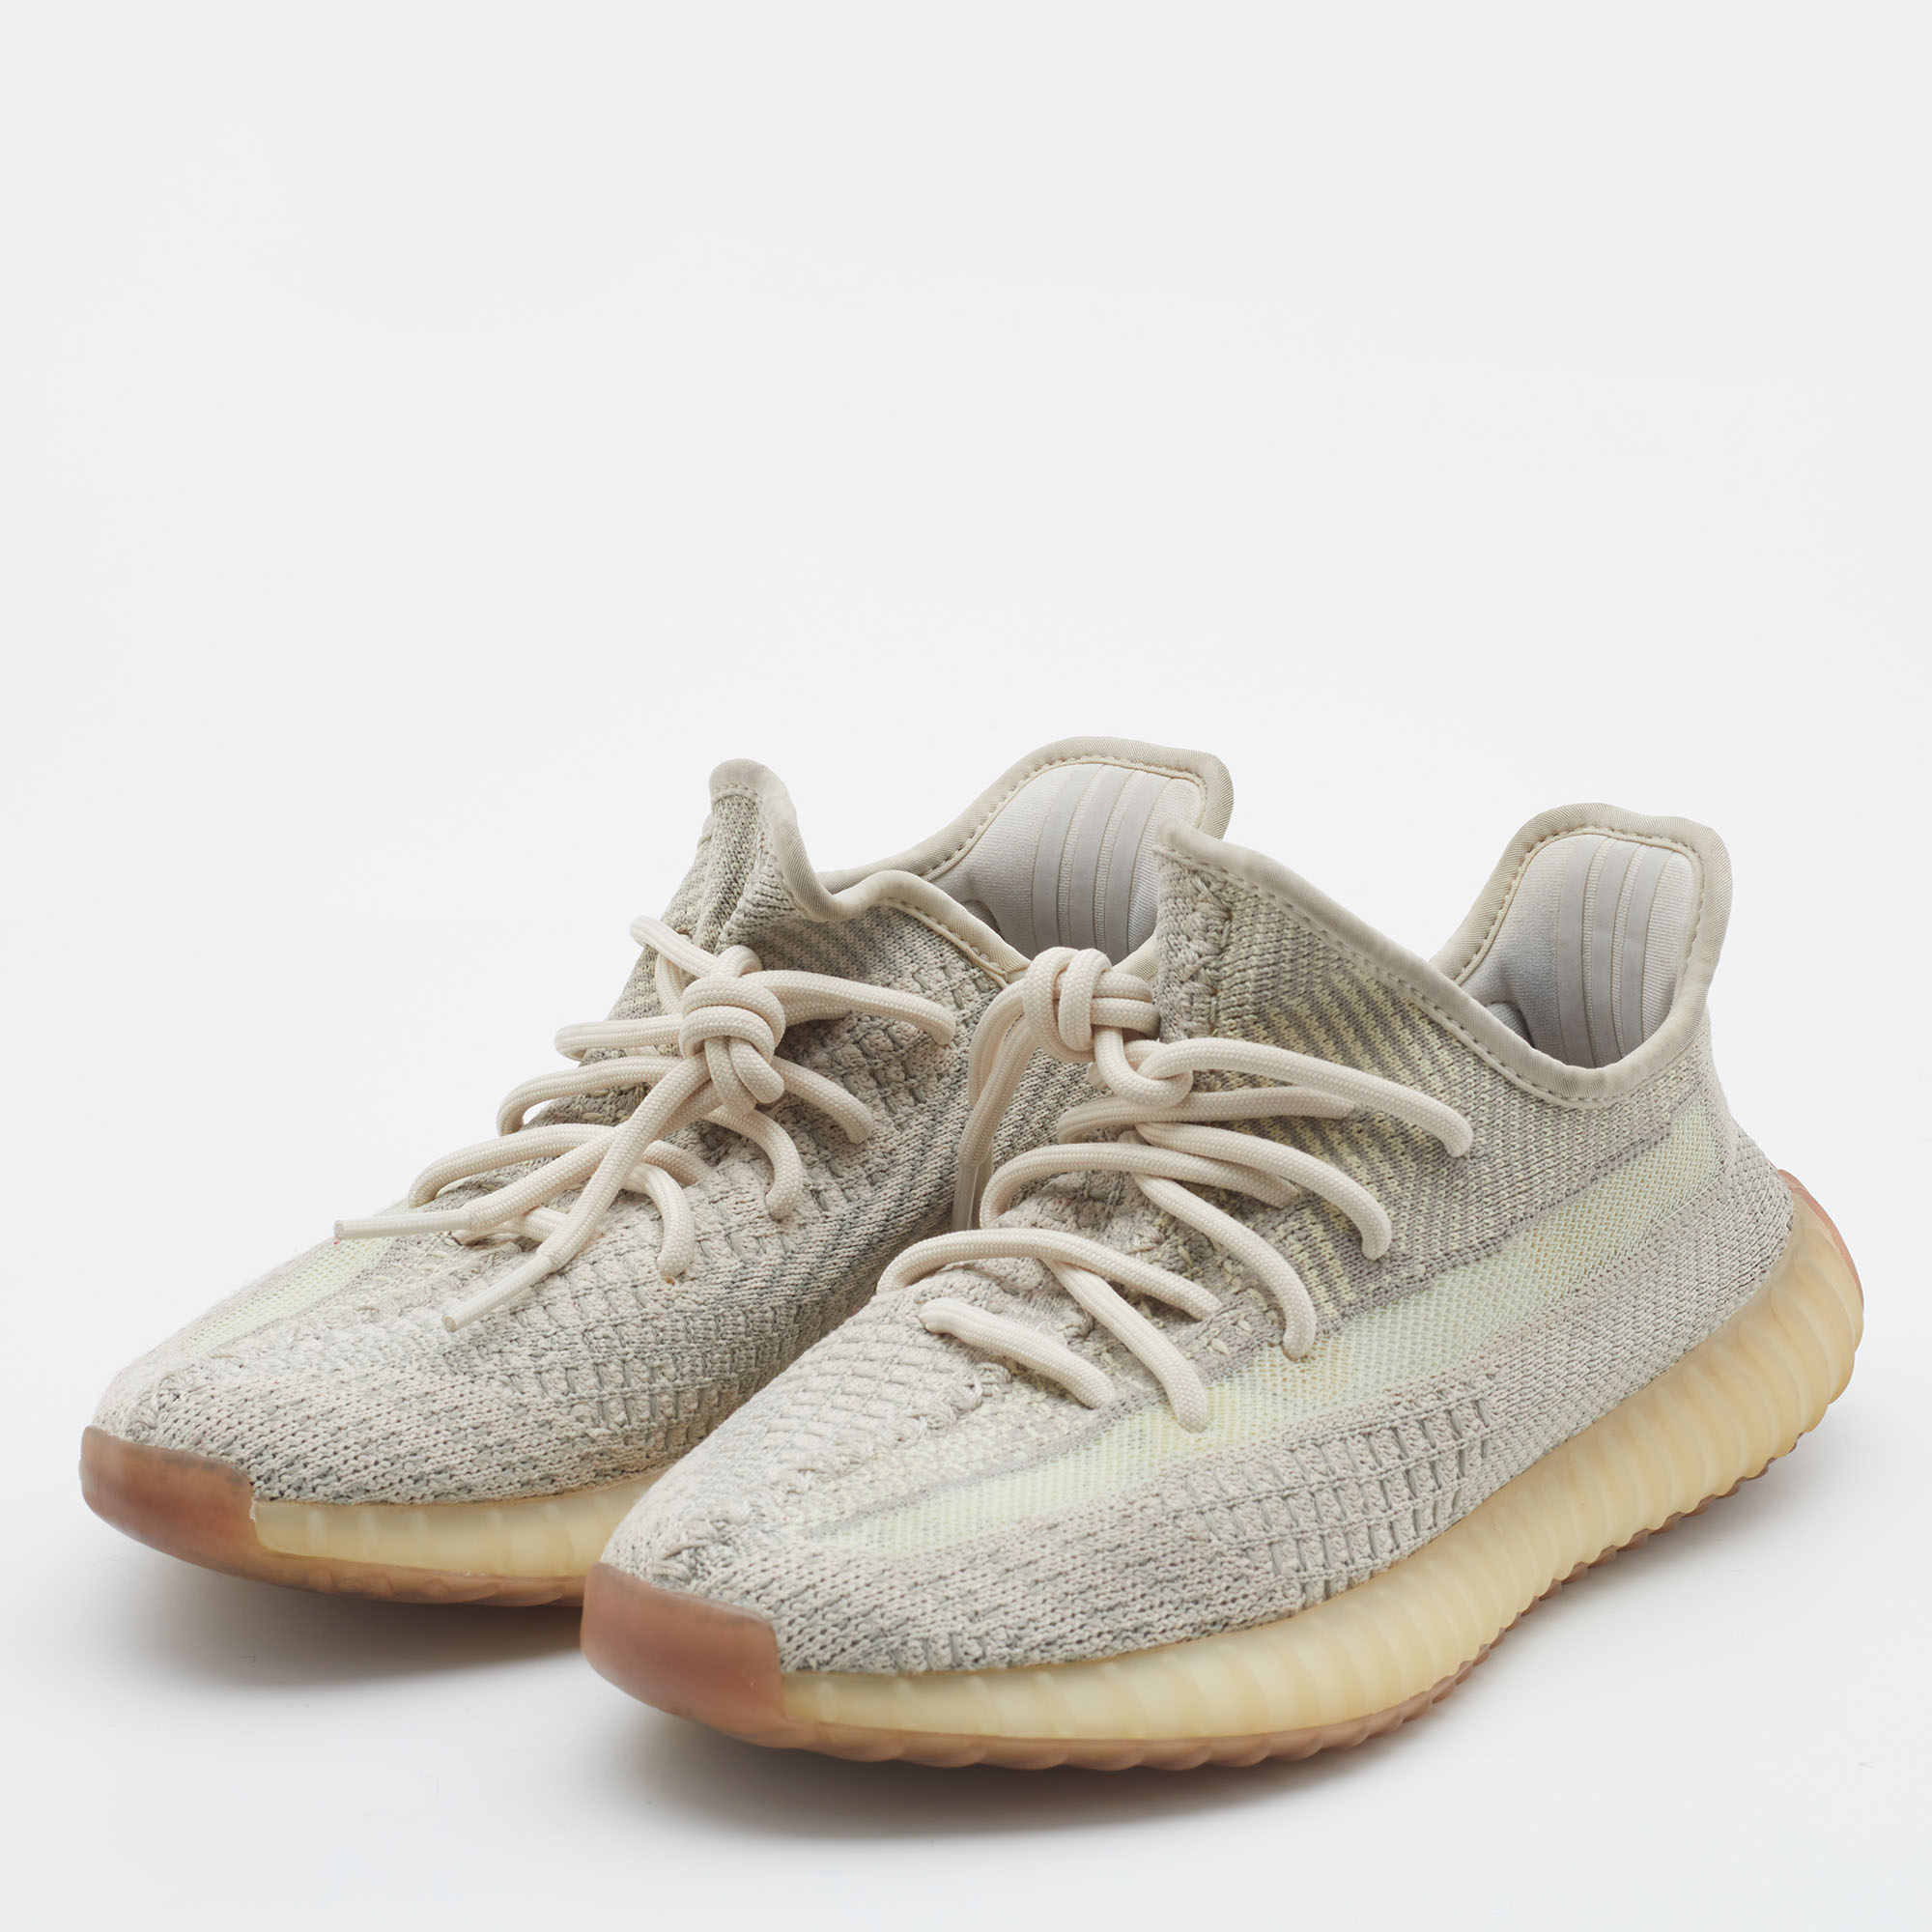 

Yeezy x Adidas Pale Green Knit Fabric Boost 350 V2 Citrin Non Reflective Sneakers Size 38 2/3